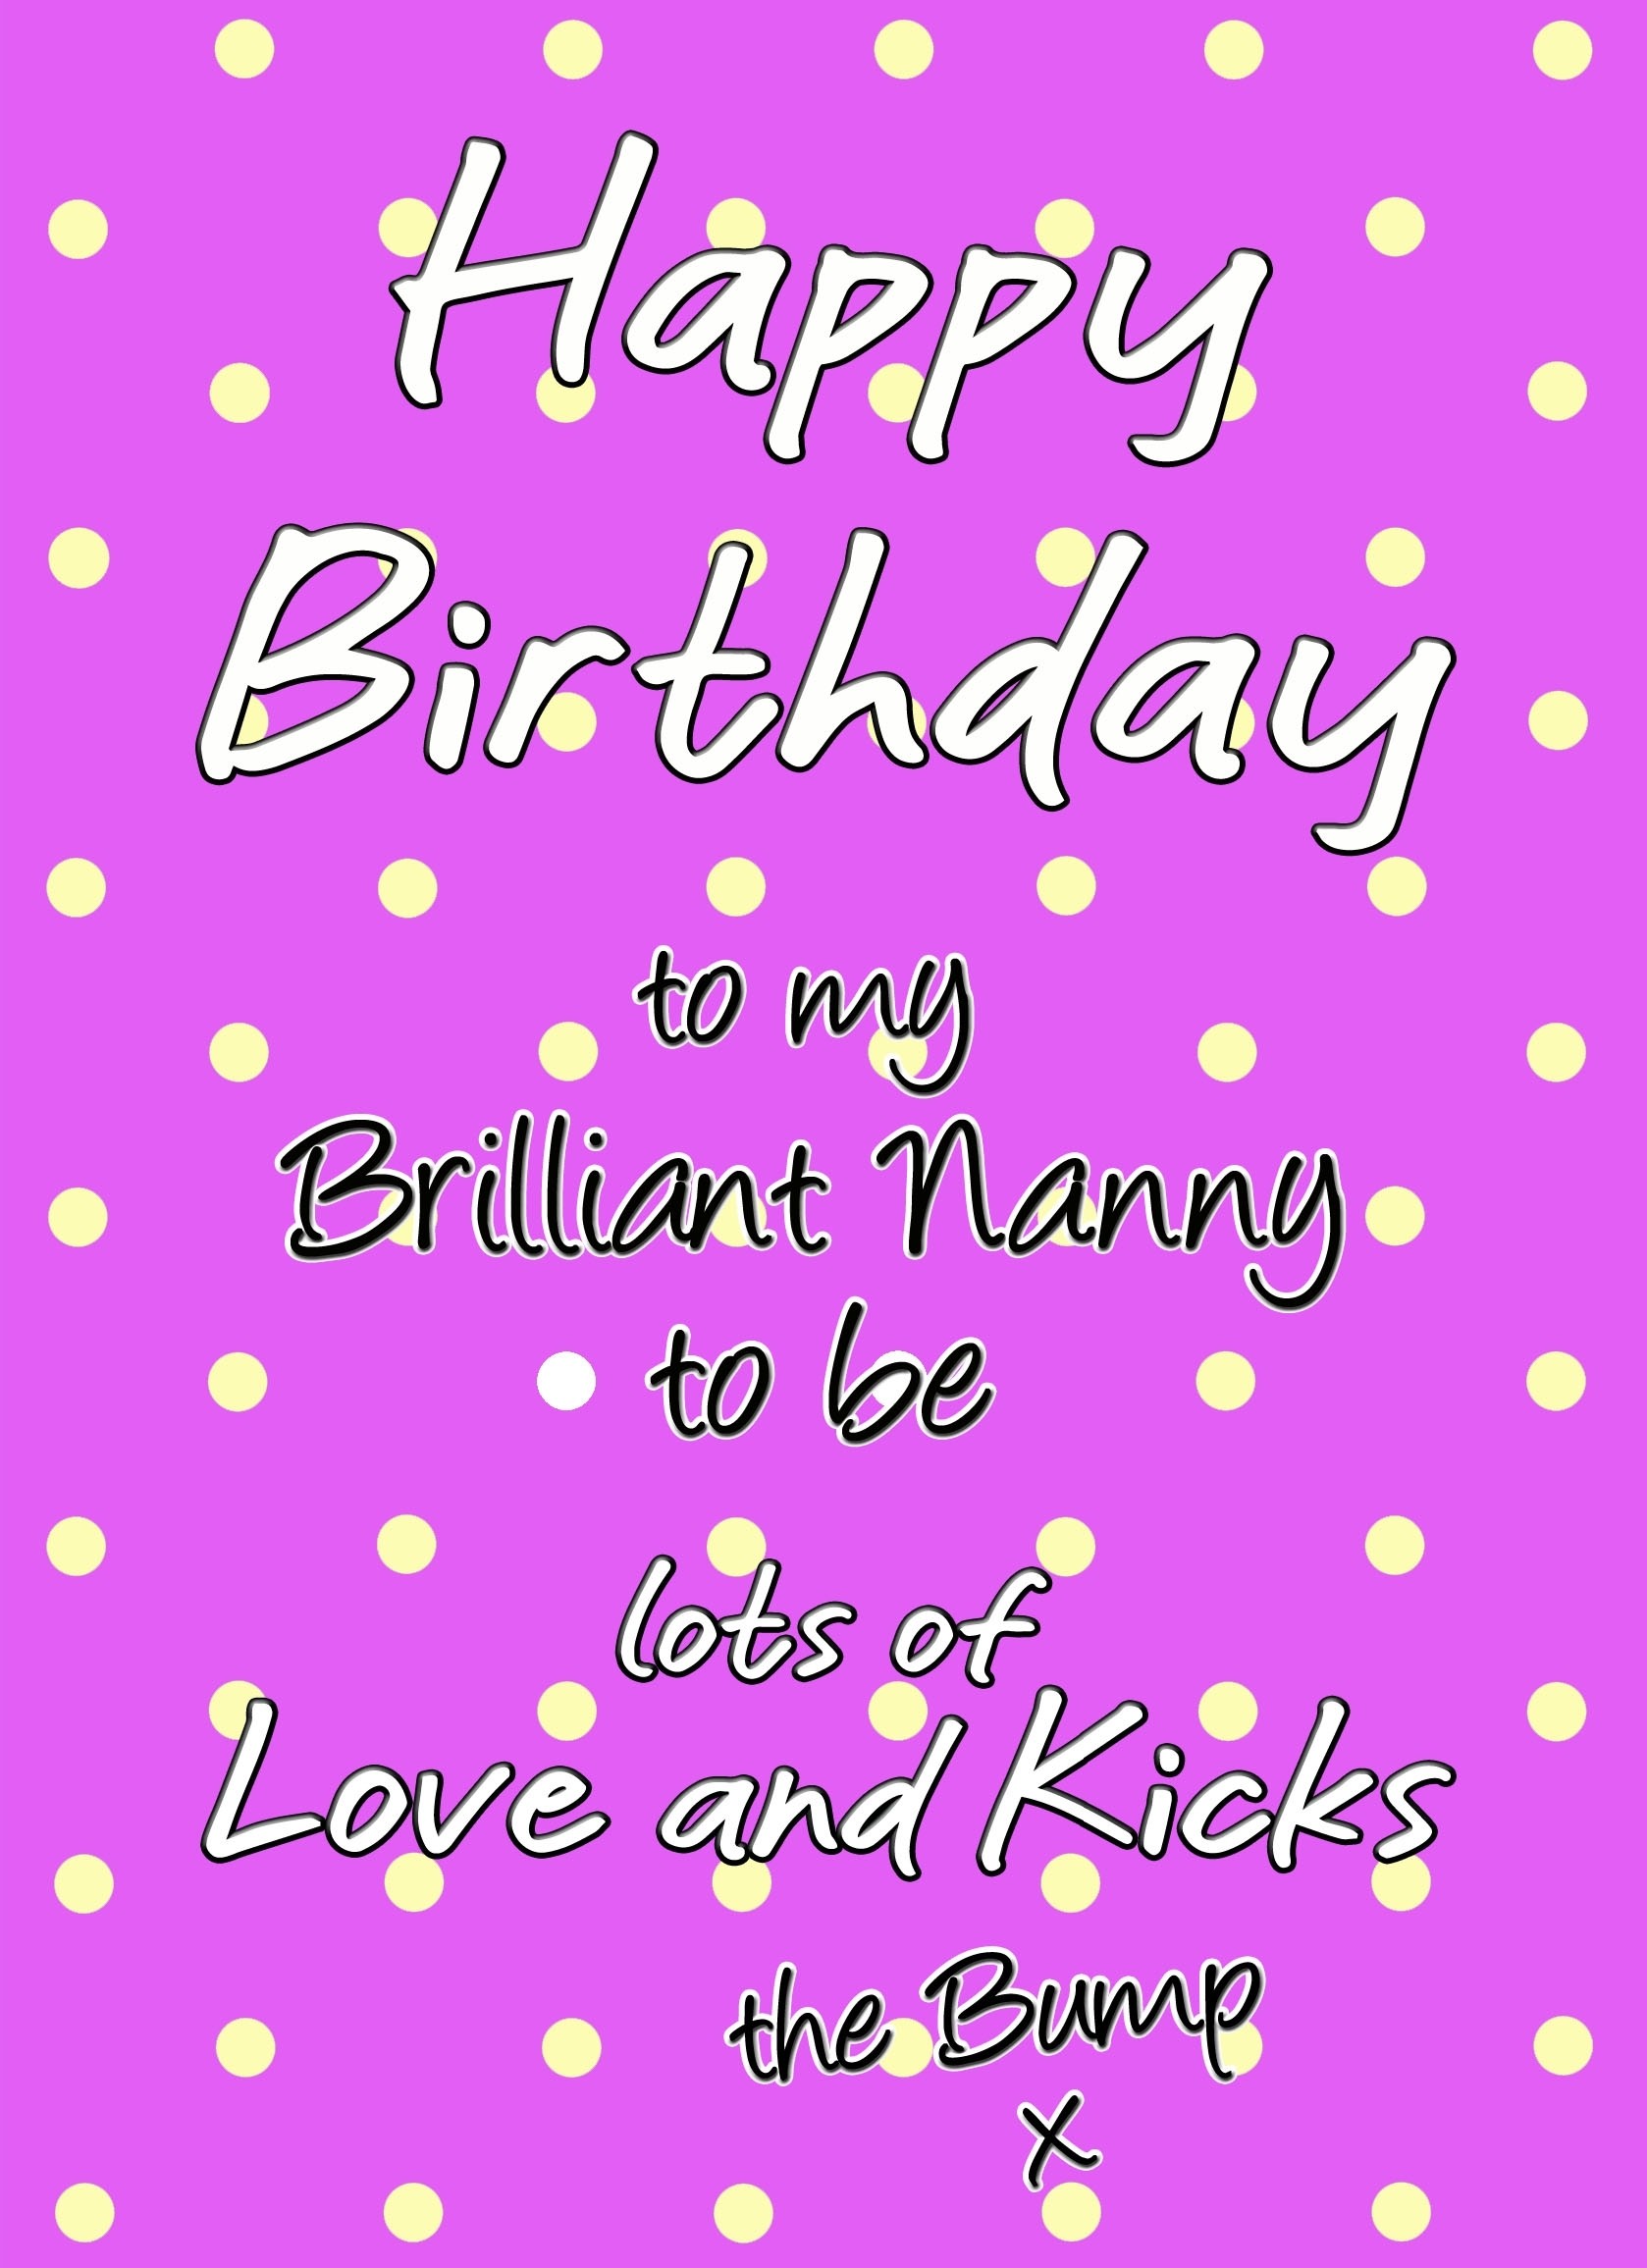 From The Bump Pregnancy Birthday Card (Nanny, Dots)